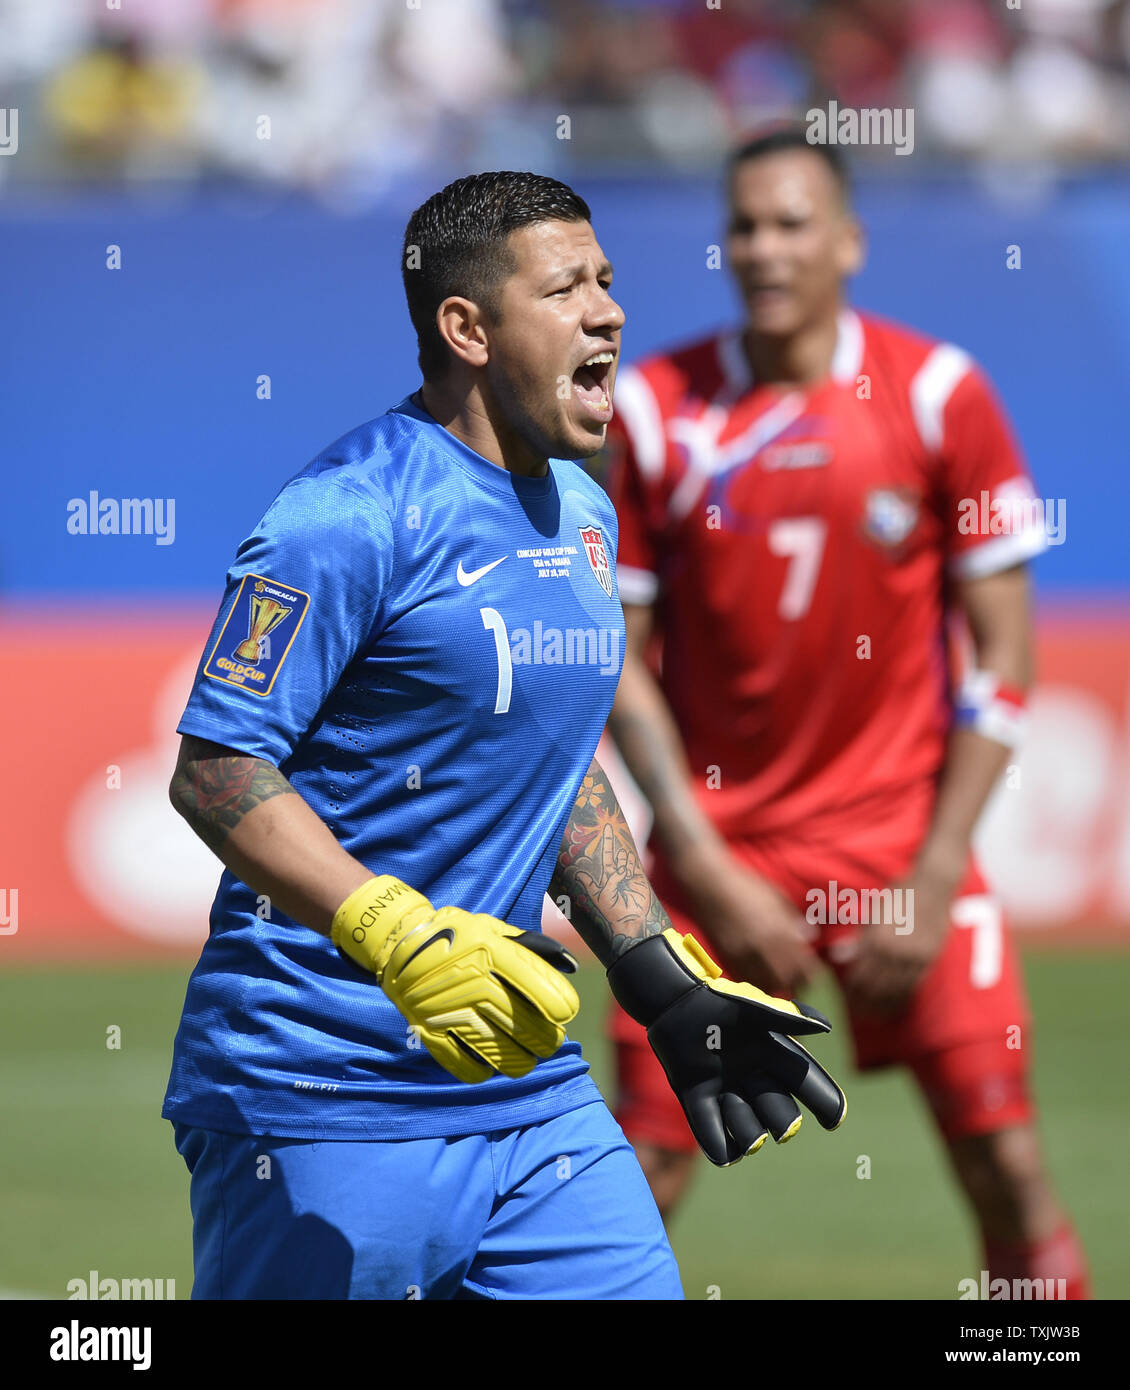 United States goalkeeper Nick Rimando yells to his team during the first half of the 2013 CONCACAF Gold Cup Final against the Panama at Soldier Field in Chicago on July 28, 2013.     UPI/Brian Kersey Stock Photo